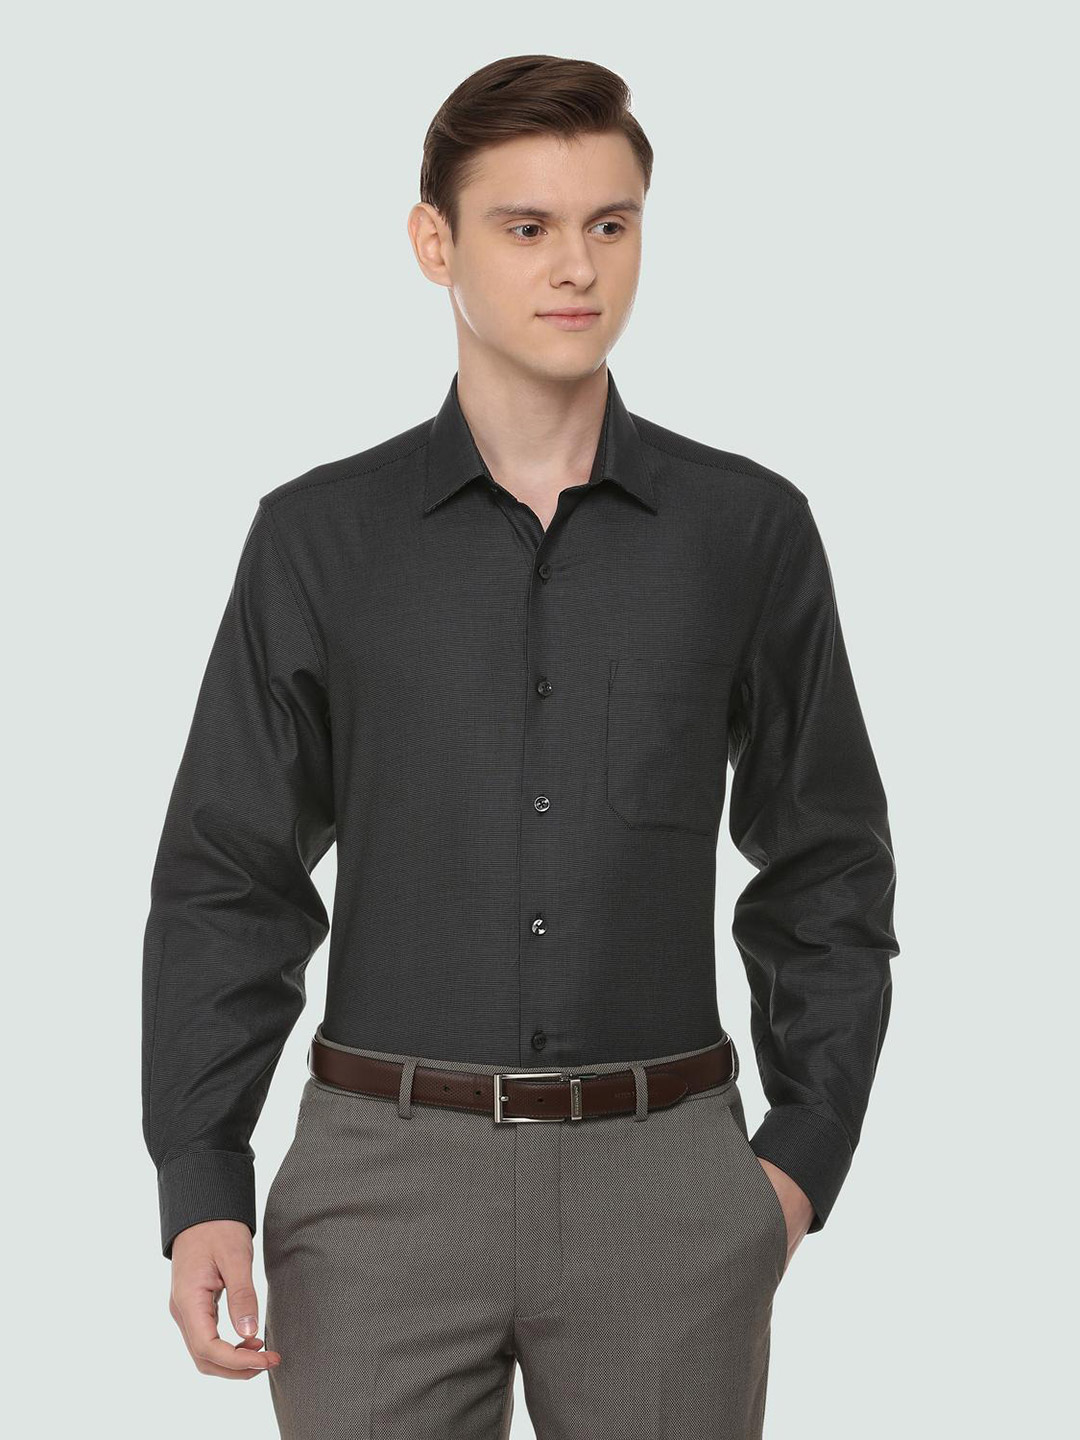 Louis Philippe solid black formal shirt - G3-MCS5405 | www.bagssaleusa.com/product-category/classic-bags/